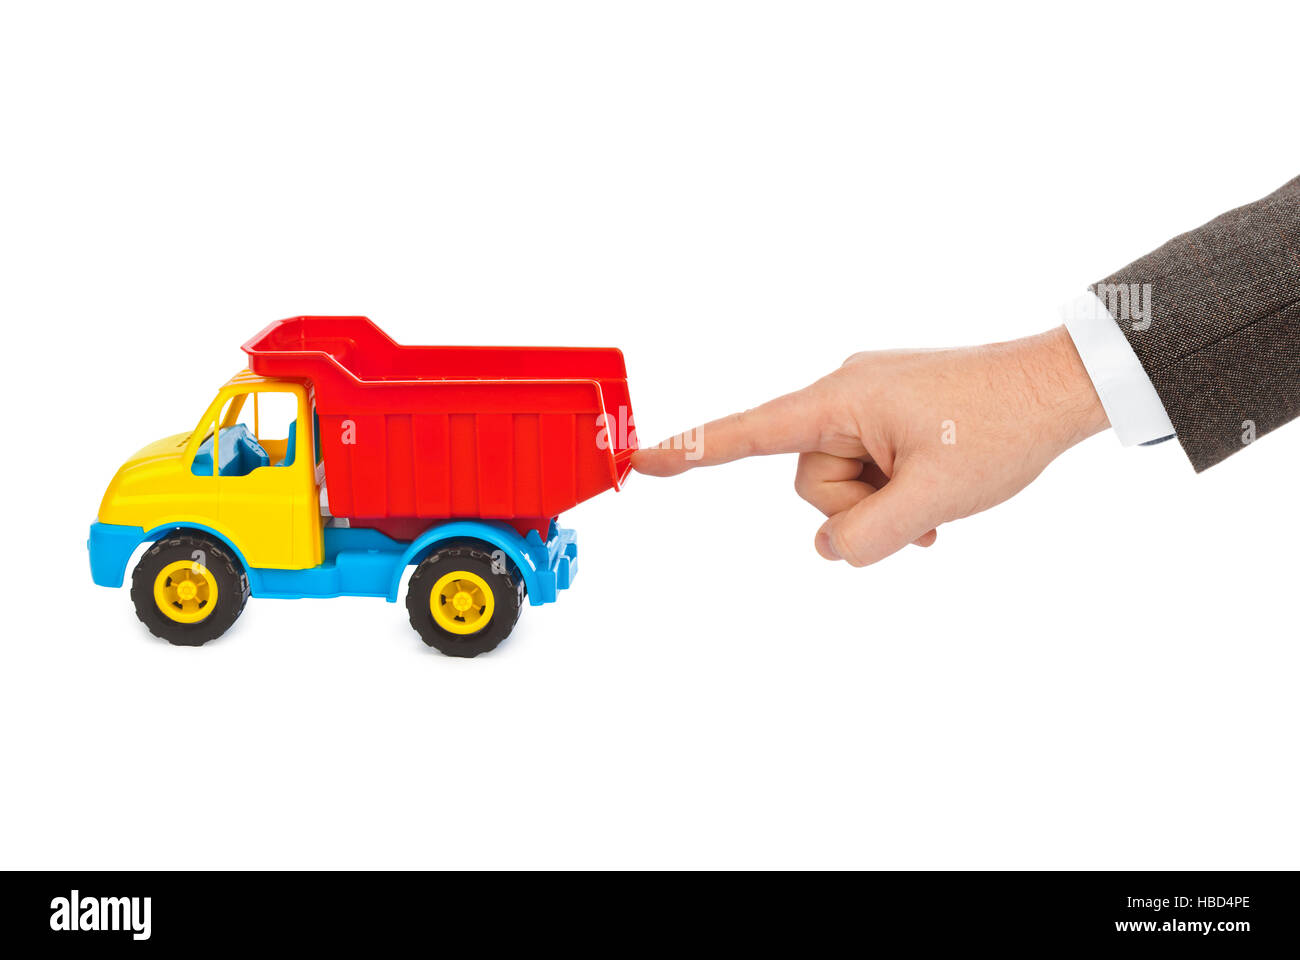 Toy car truck and hand Stock Photo